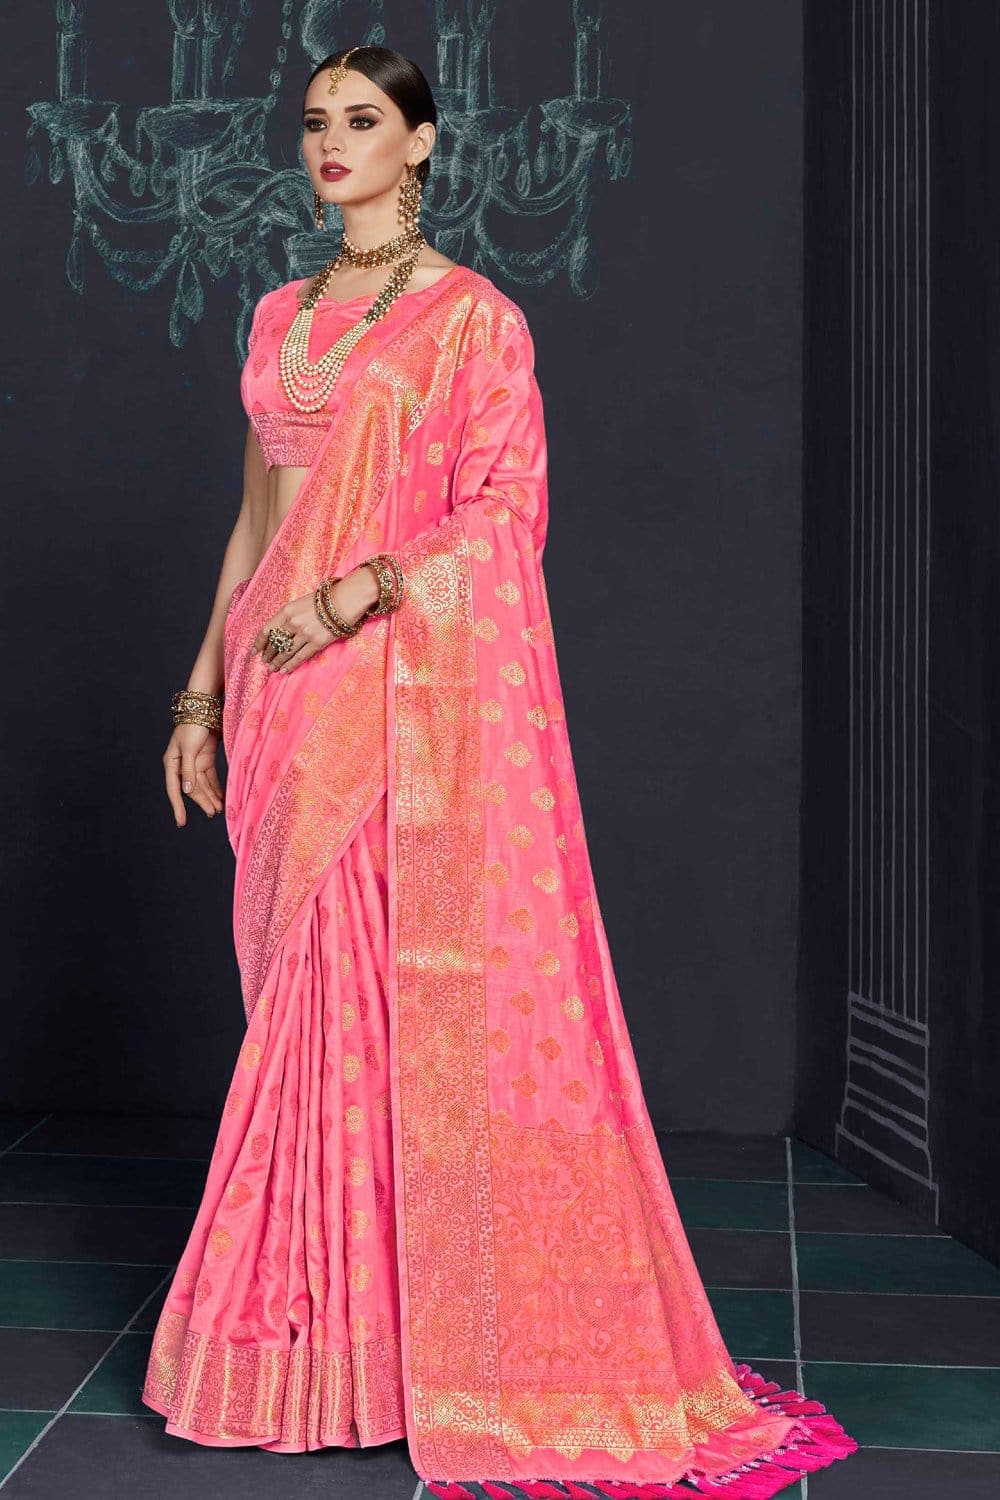 Baby pink south silk saree with monochrome blouse - Buy online on Karagiri - Free shipping to USA